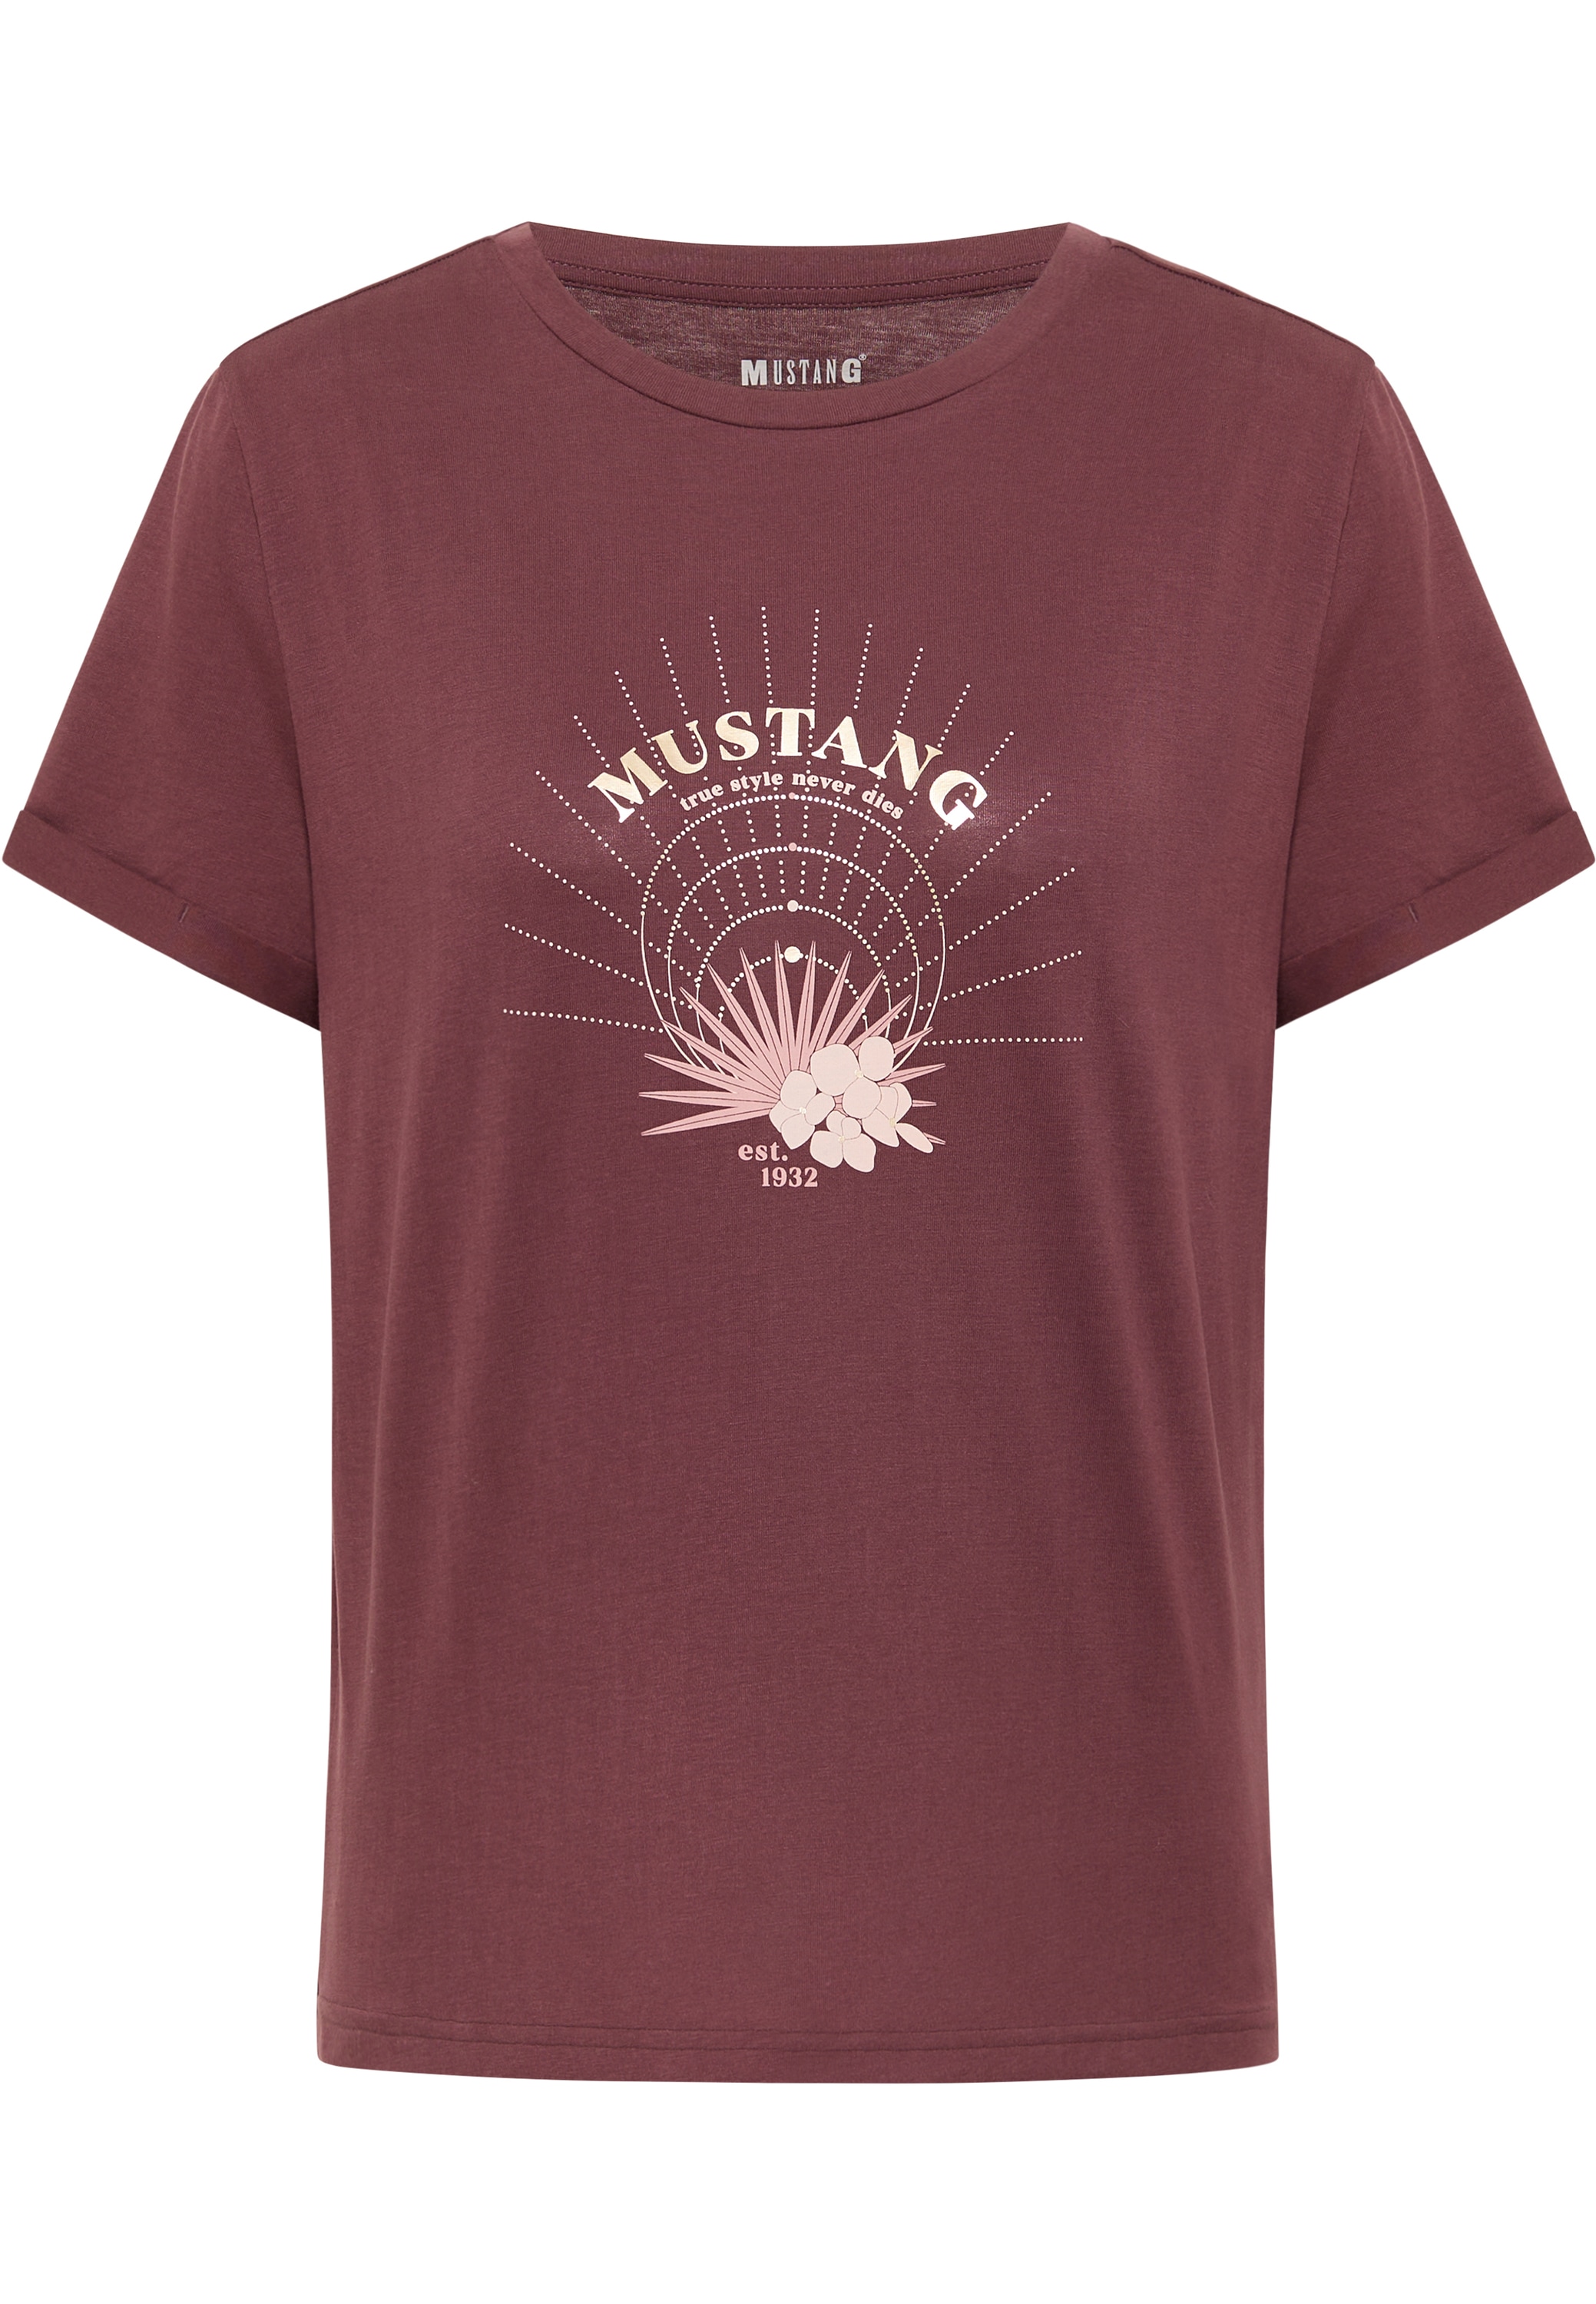 T-Shirt »Style Alina C Foil« bei OTTOversand MUSTANG